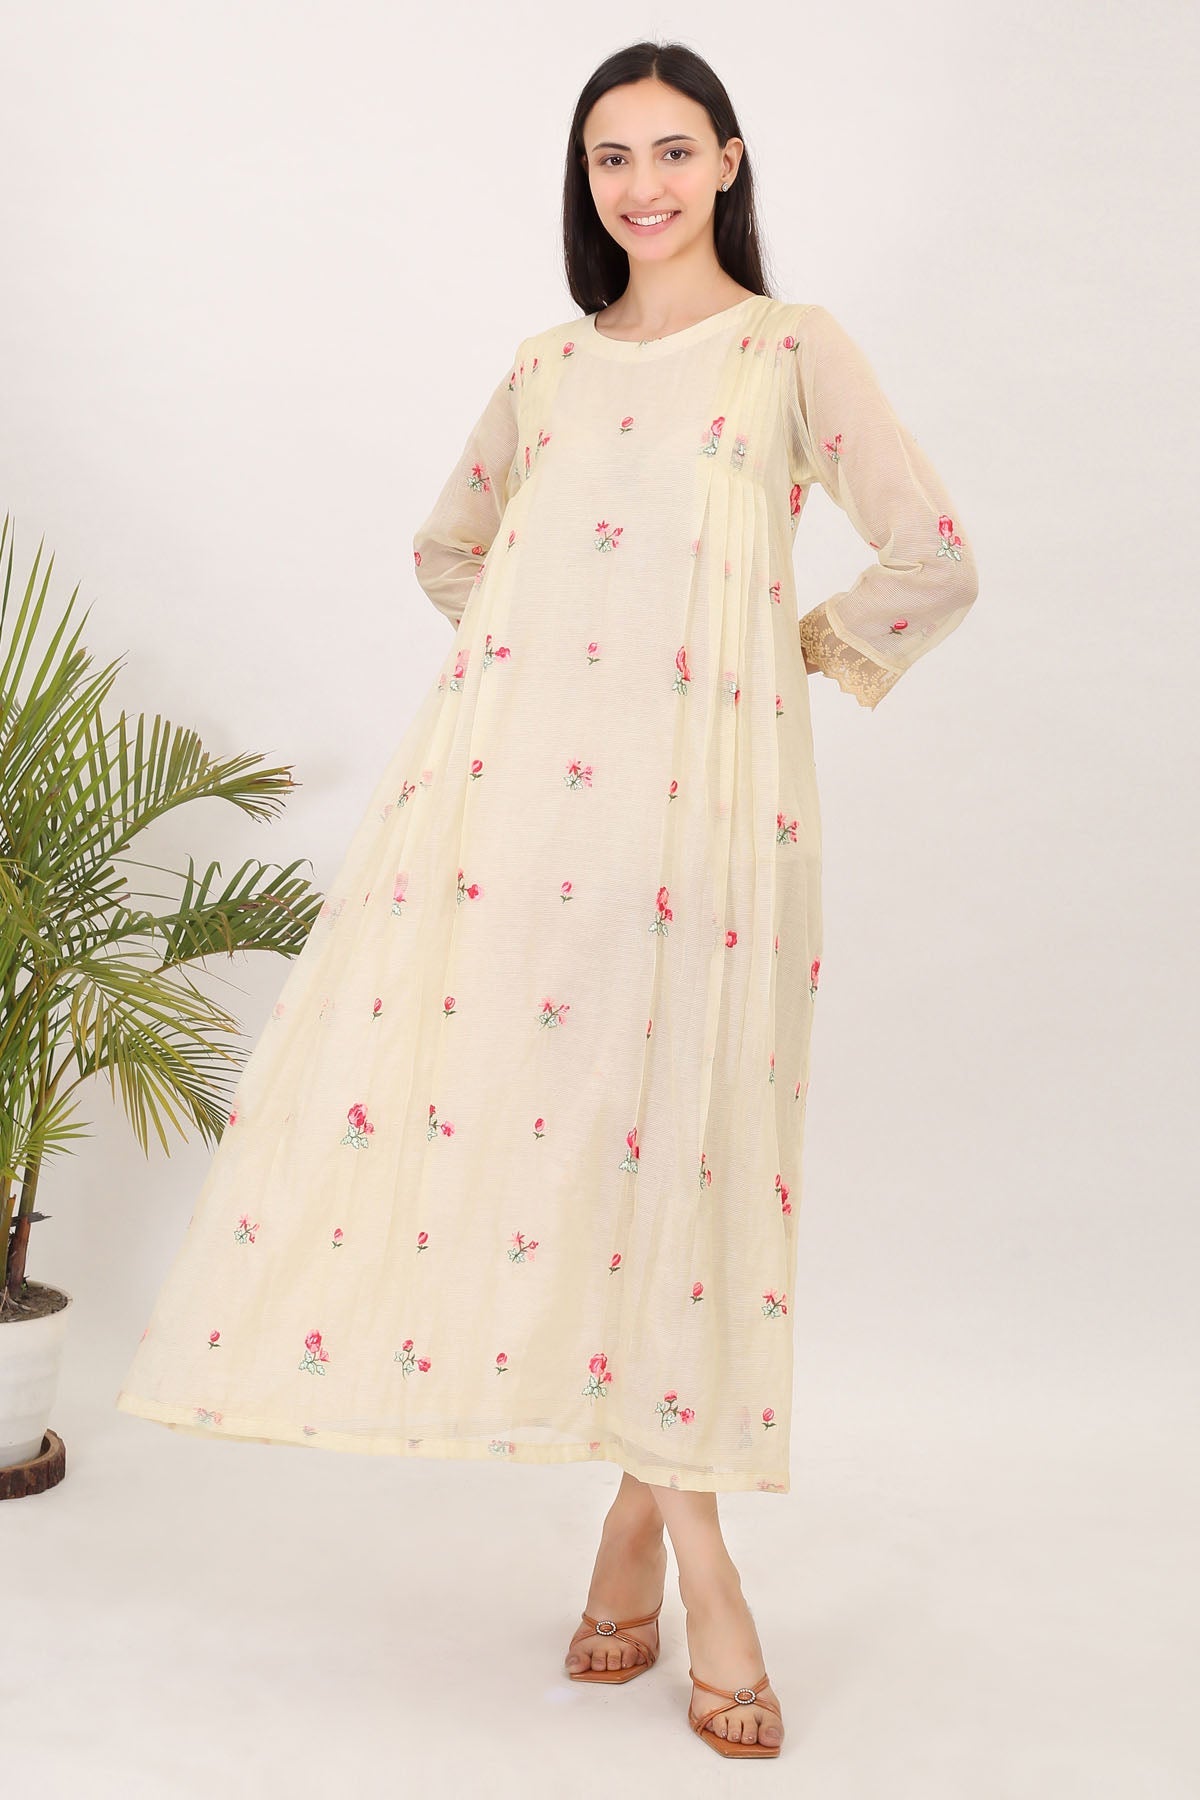 Simply Kitsch Yellow Cotton Embroidered Dress For Women Online At ScrollnShops